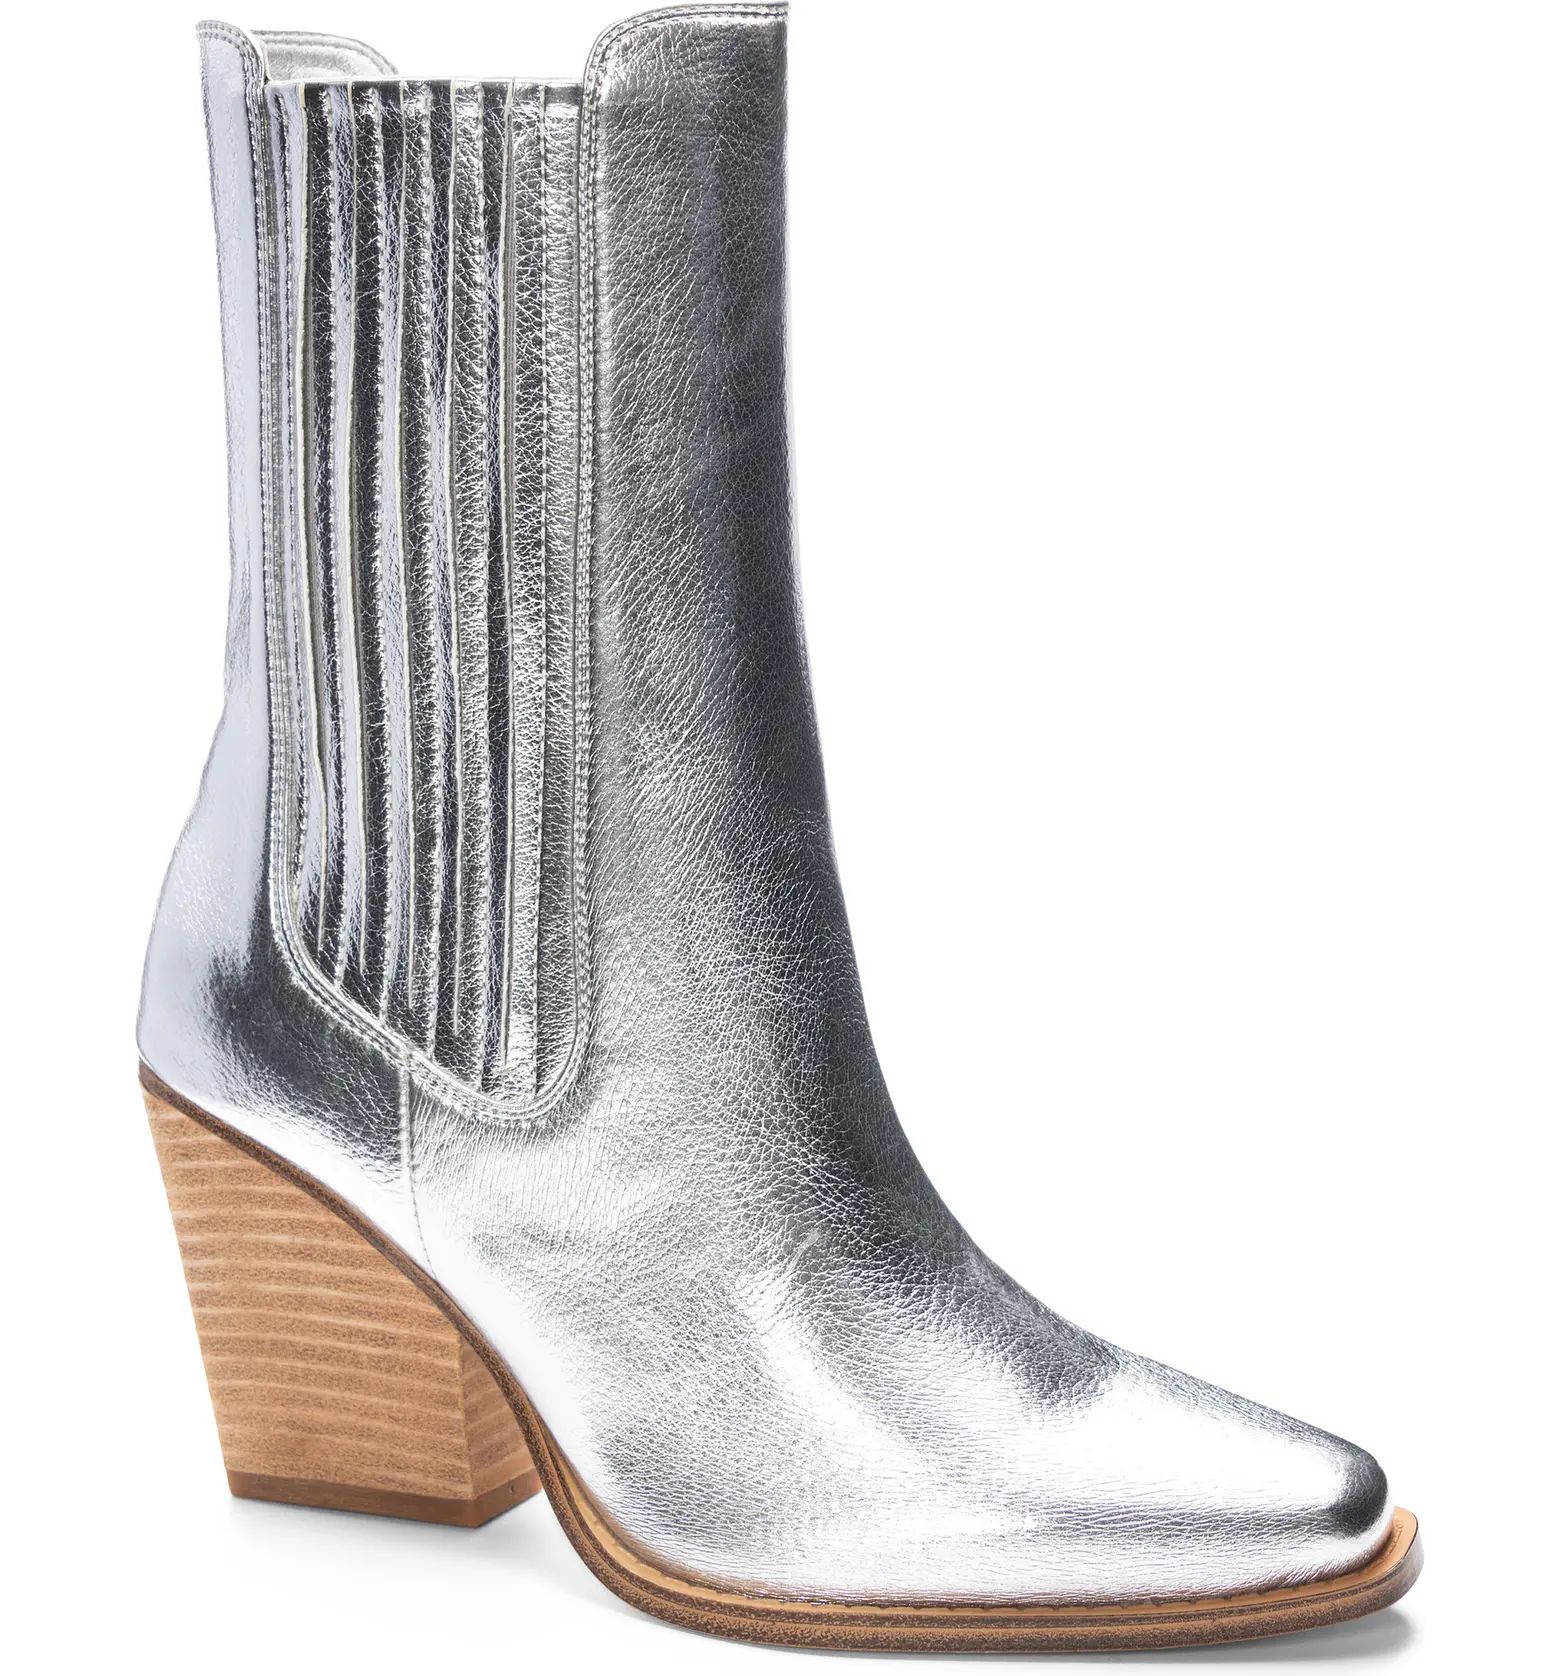 Chinese Laundry Cali Metallic Bootie | Nordstrom | Nordstrom